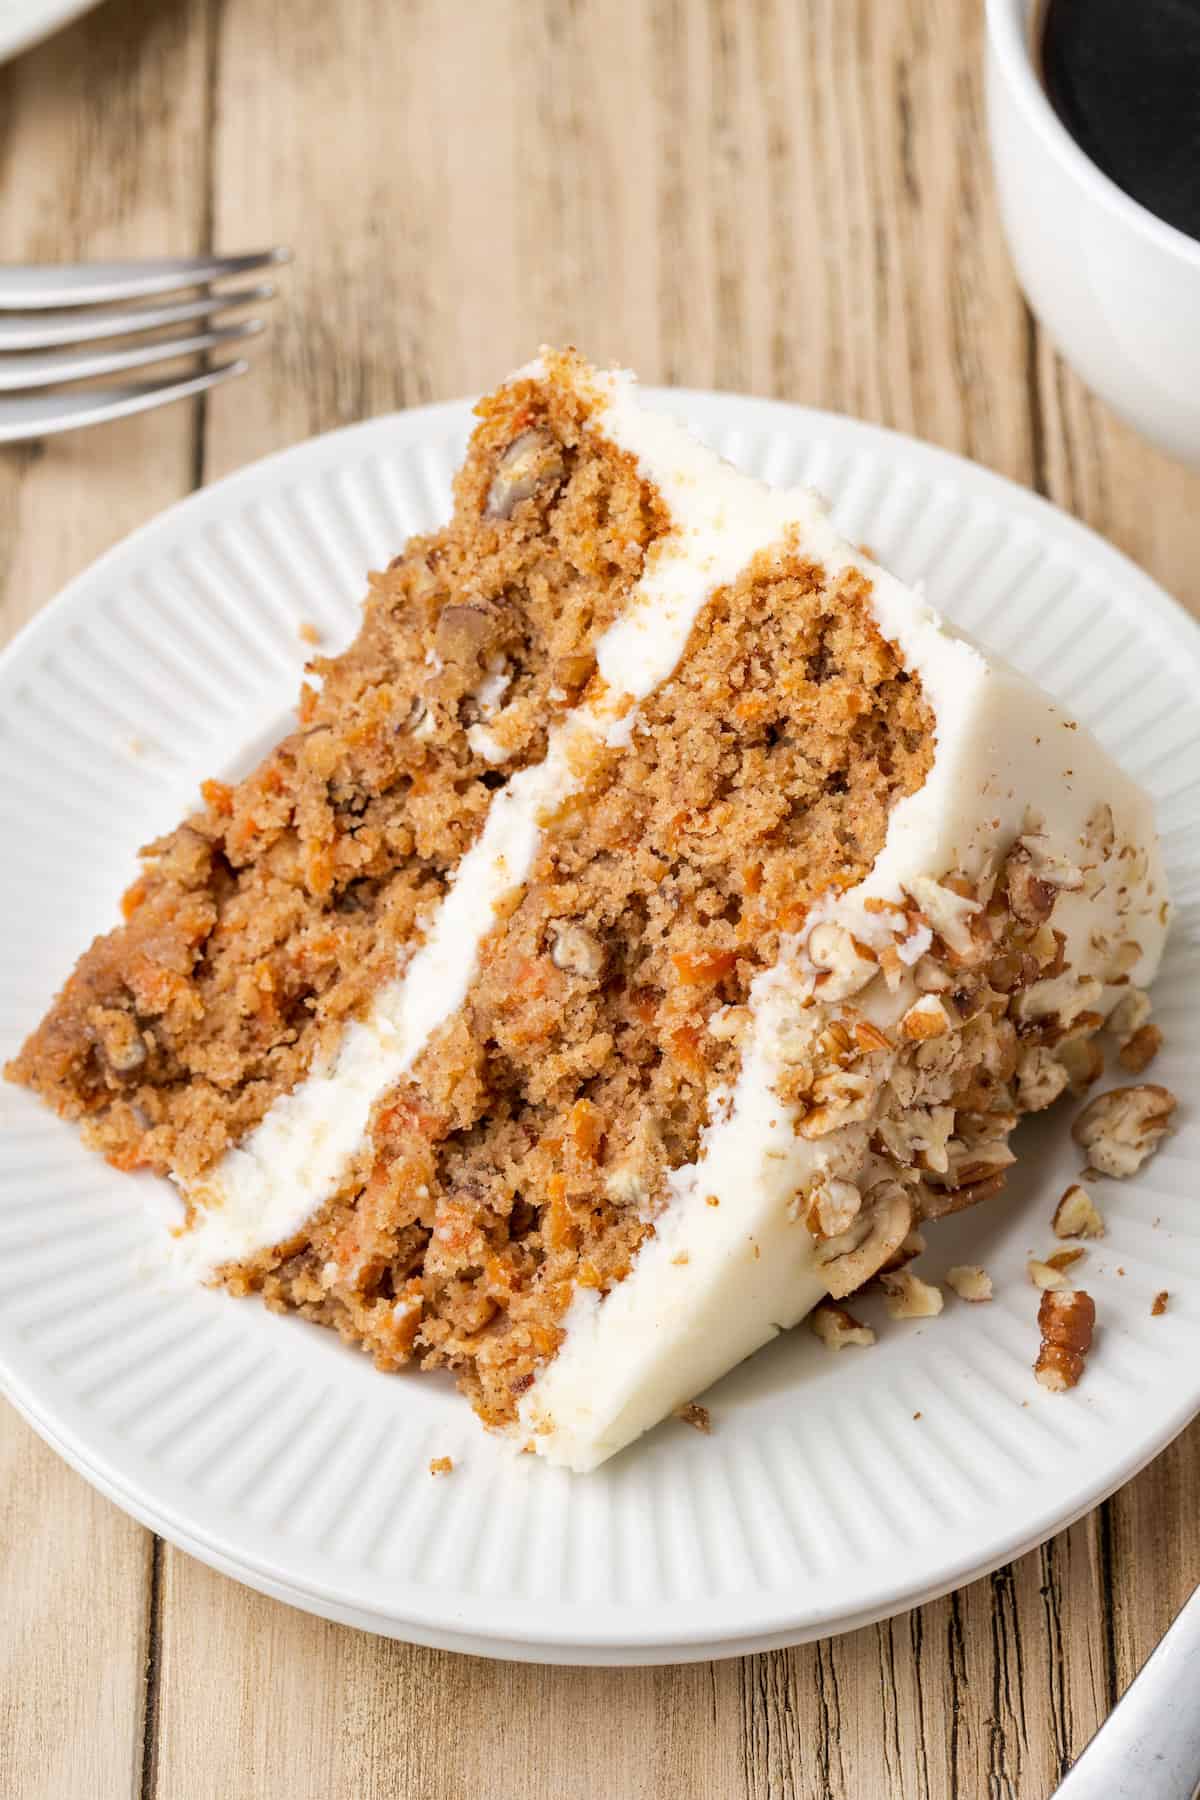 A slice of frosted gluten-free carrot cake on a white plate next to a fork and a cup of coffee.